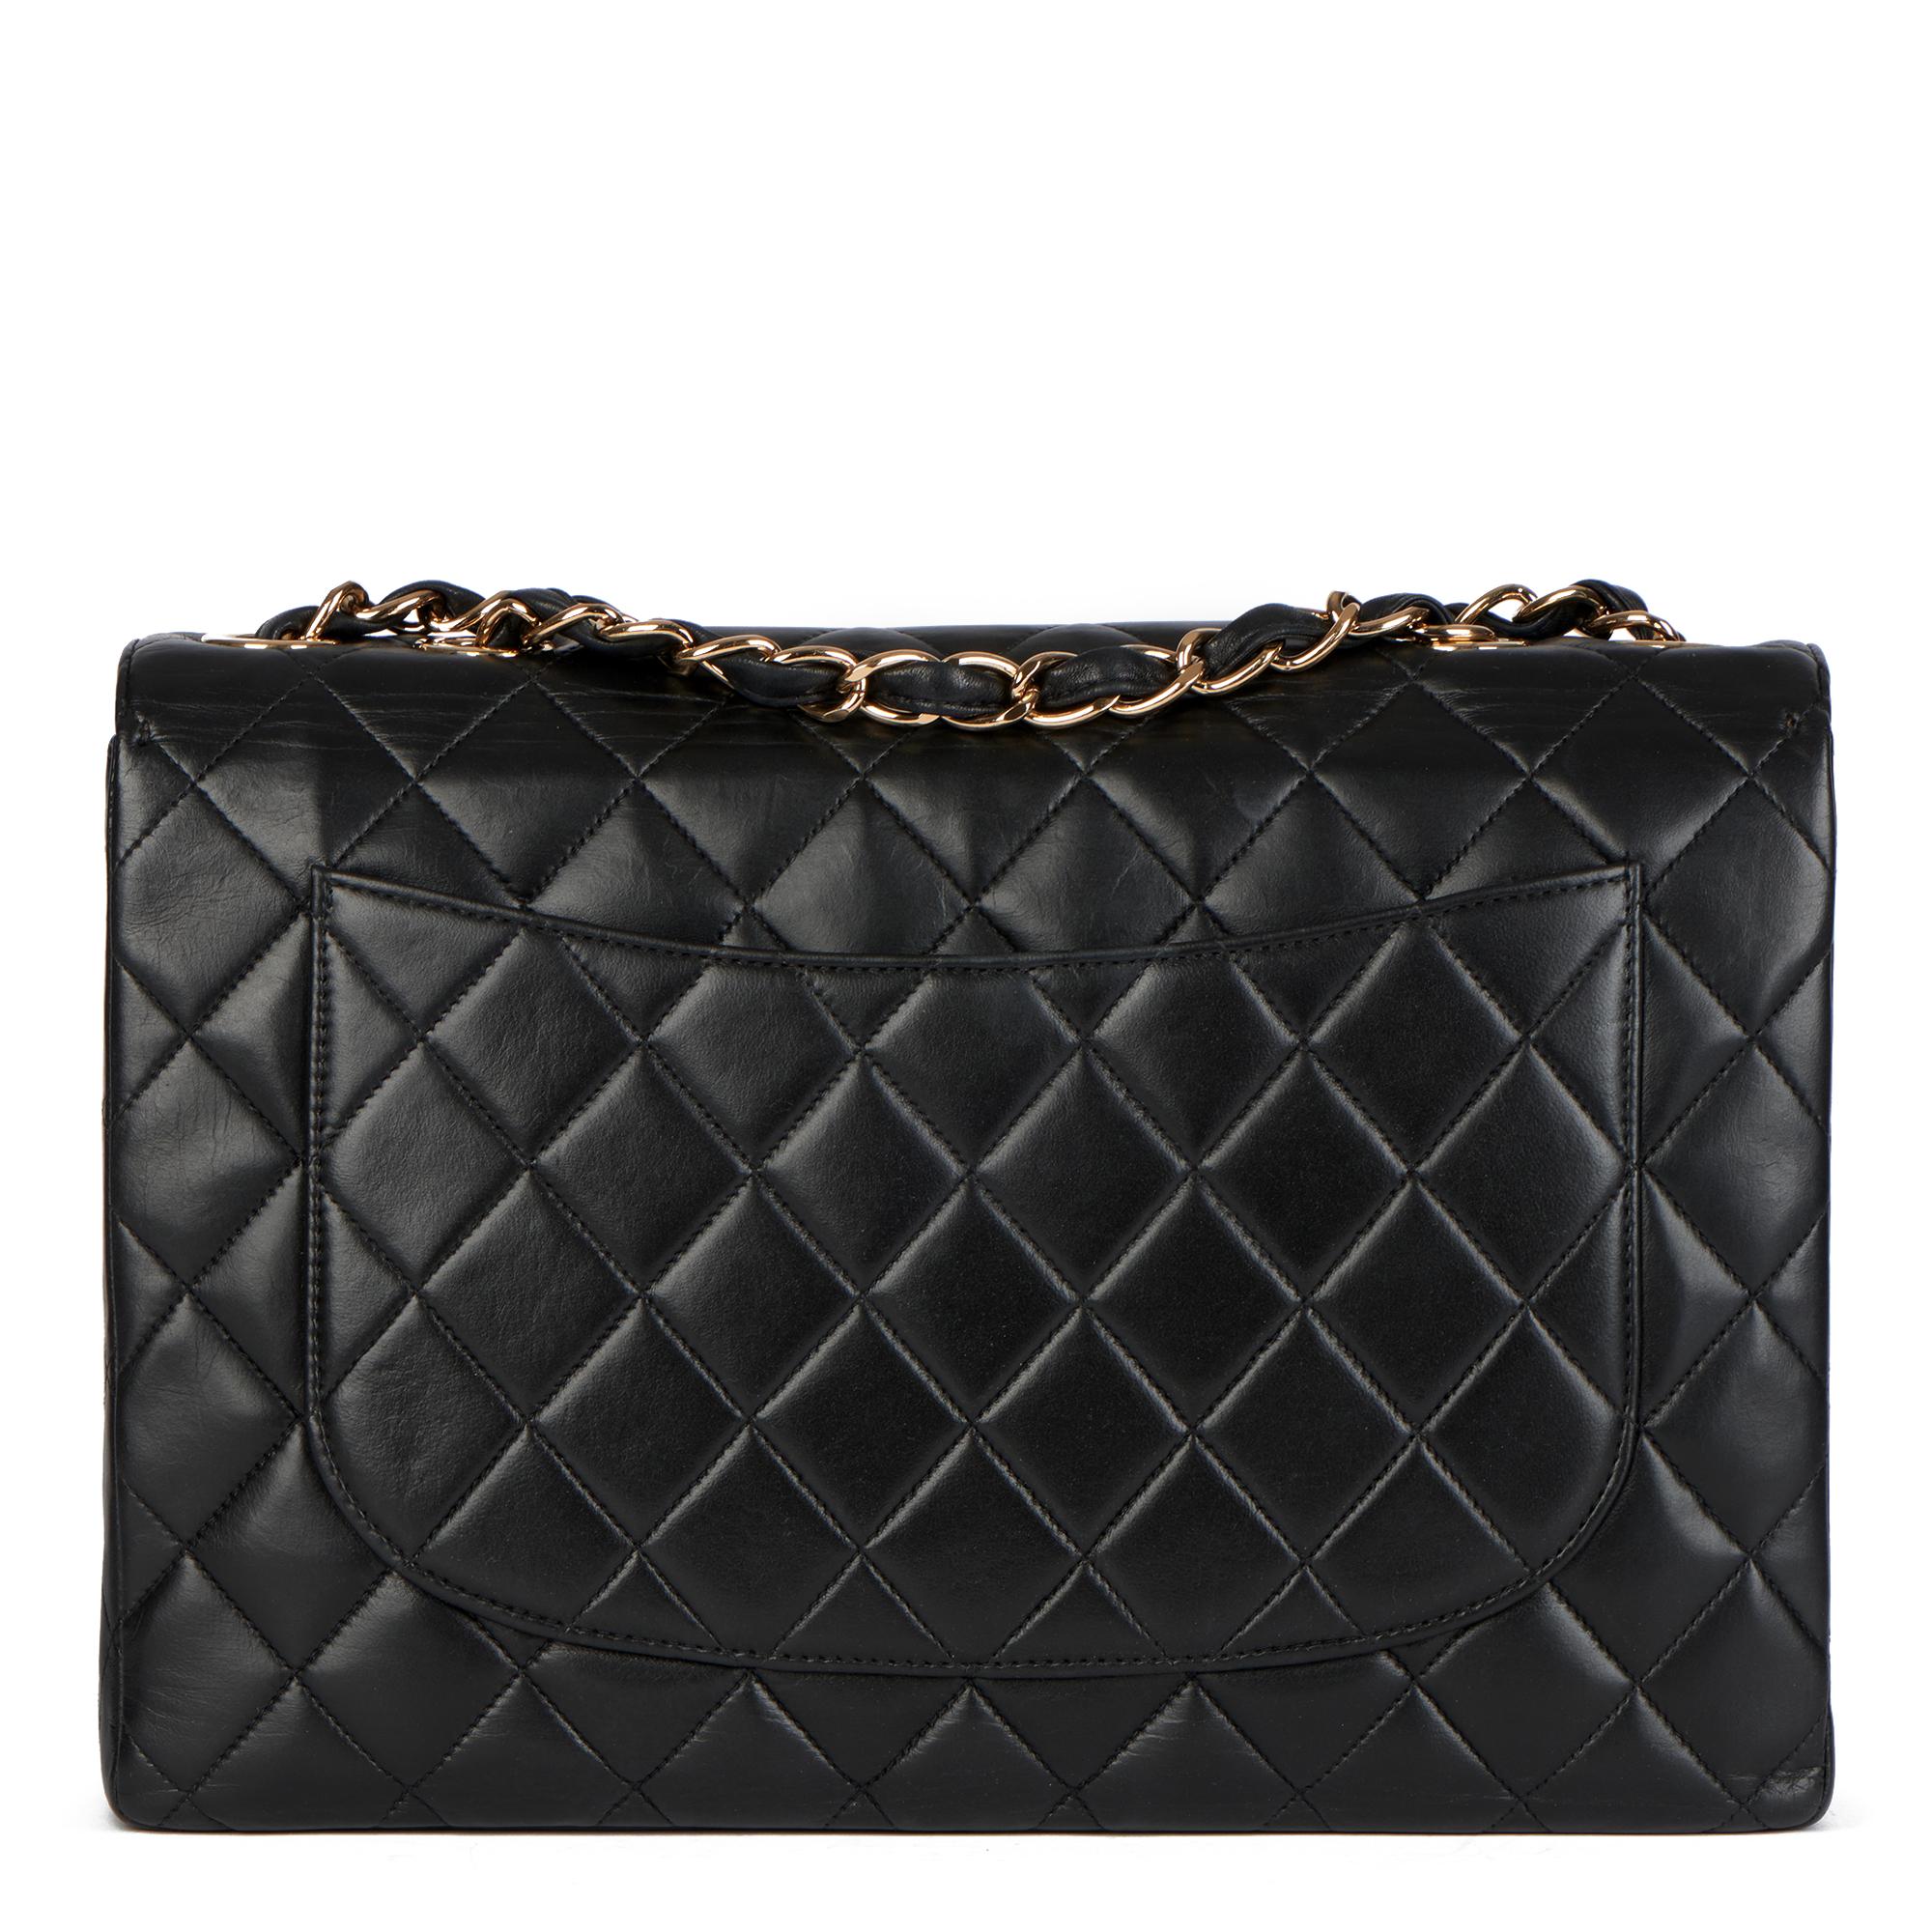 Chanel Black Quilted Lambskin Leather Vintage Jumbo Classic Single Flap Bag 1